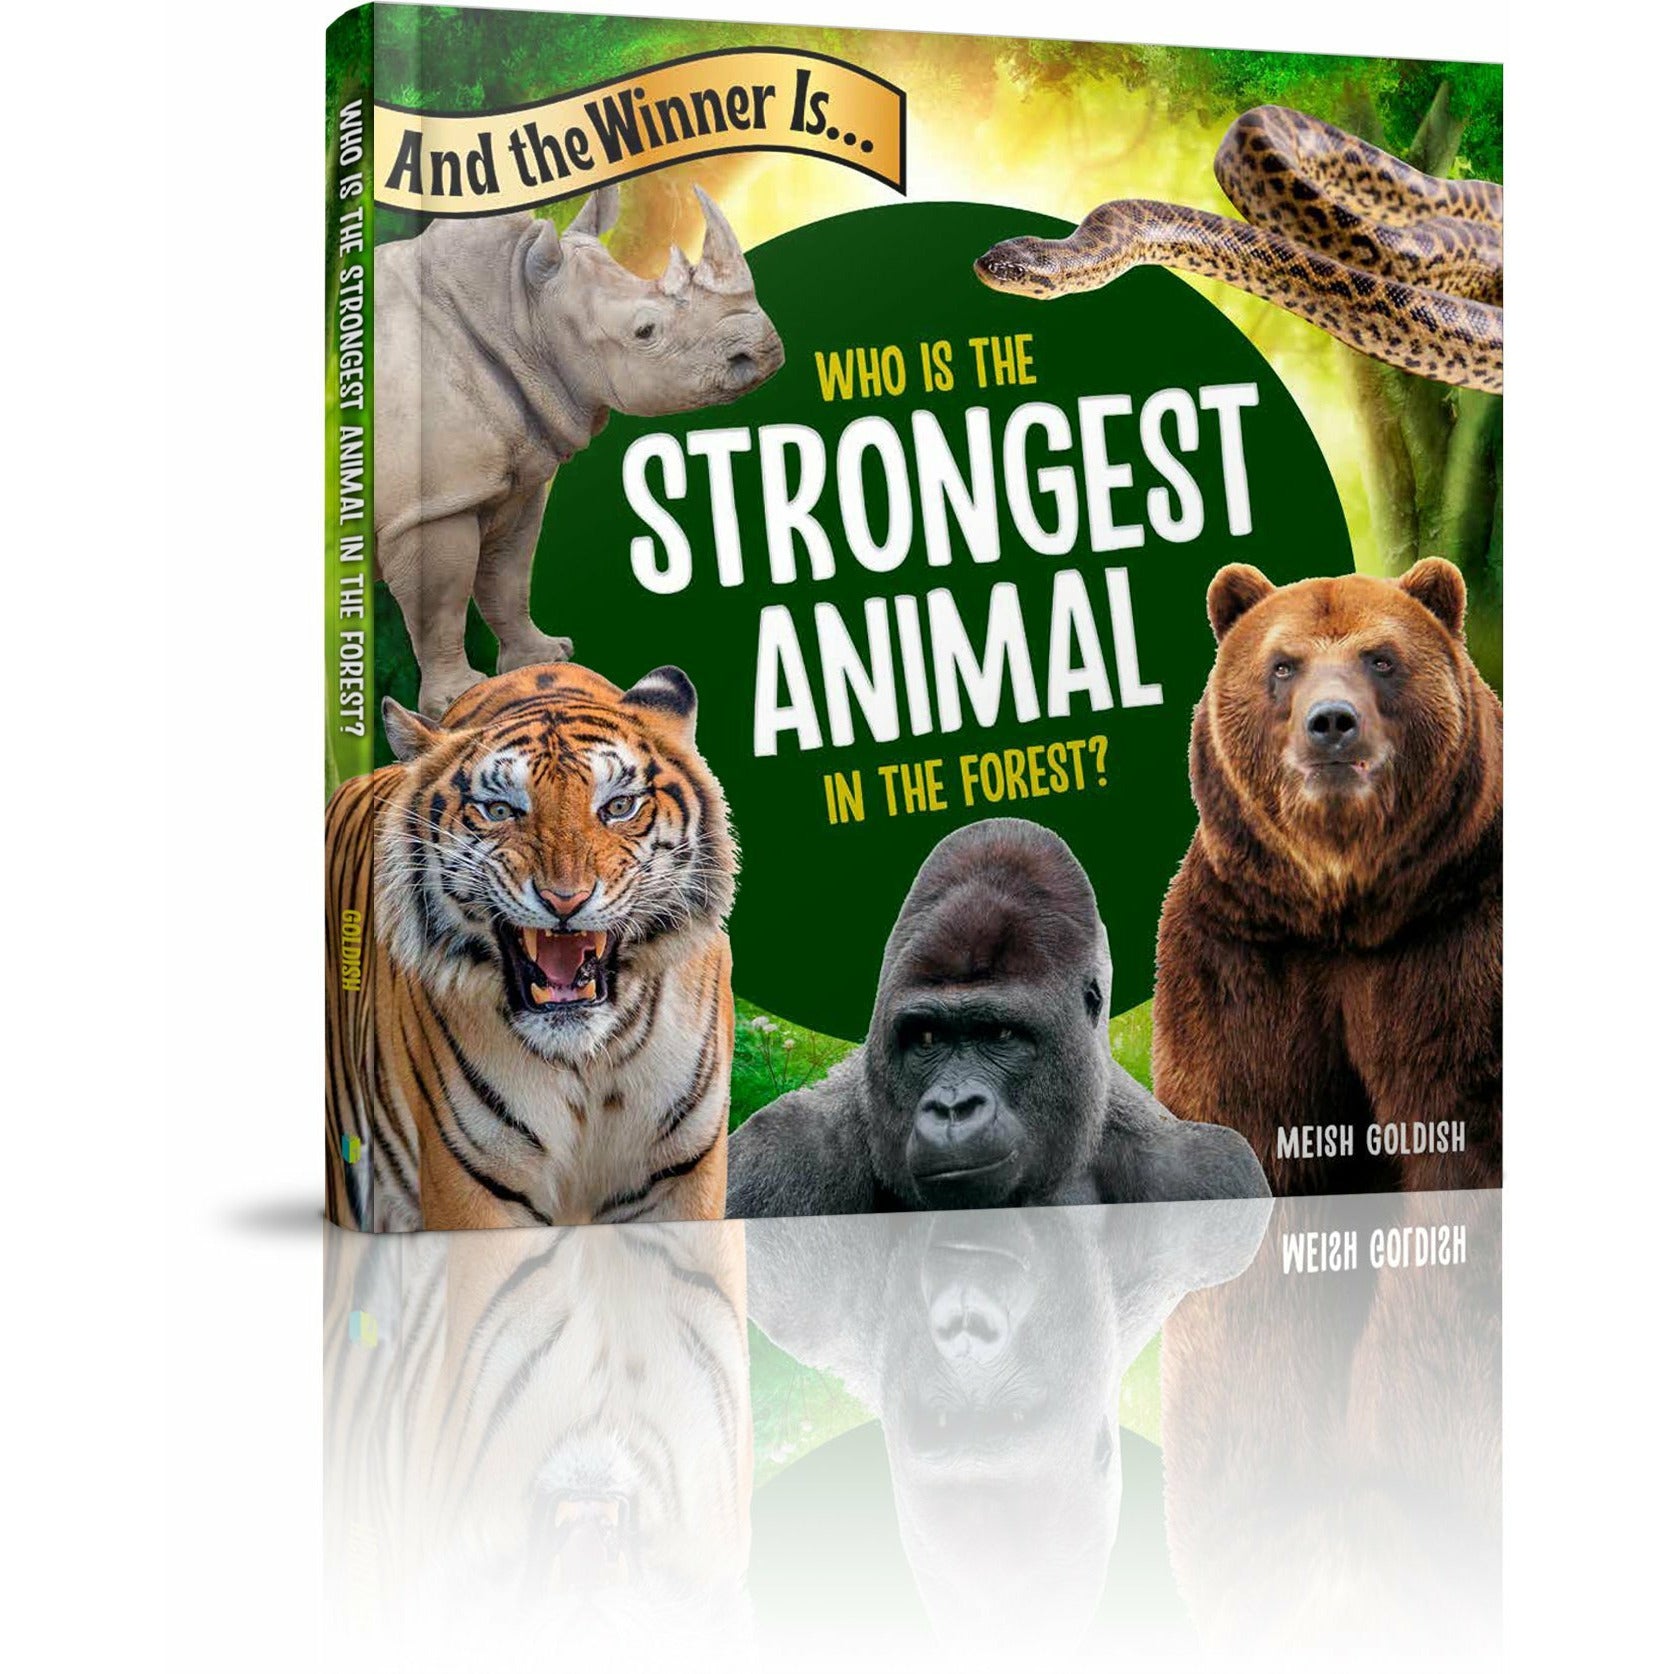 And the Winner Is... Who Is the Strongest Animal in the Forest? - 9781614653387 - Menucha Publishers Inc.